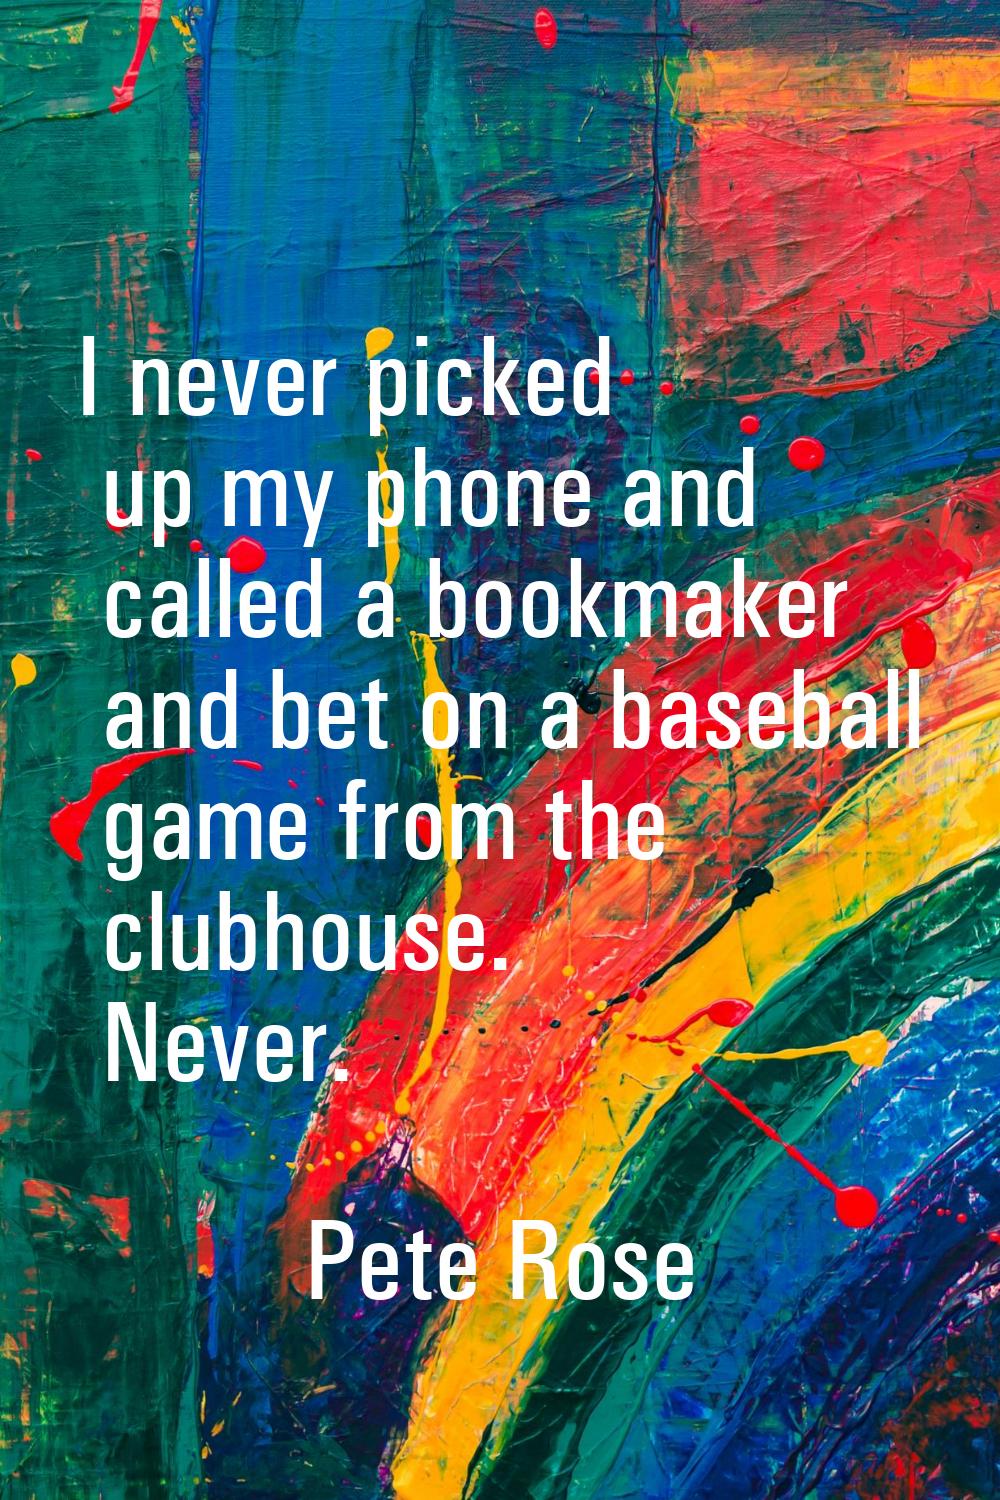 I never picked up my phone and called a bookmaker and bet on a baseball game from the clubhouse. Ne